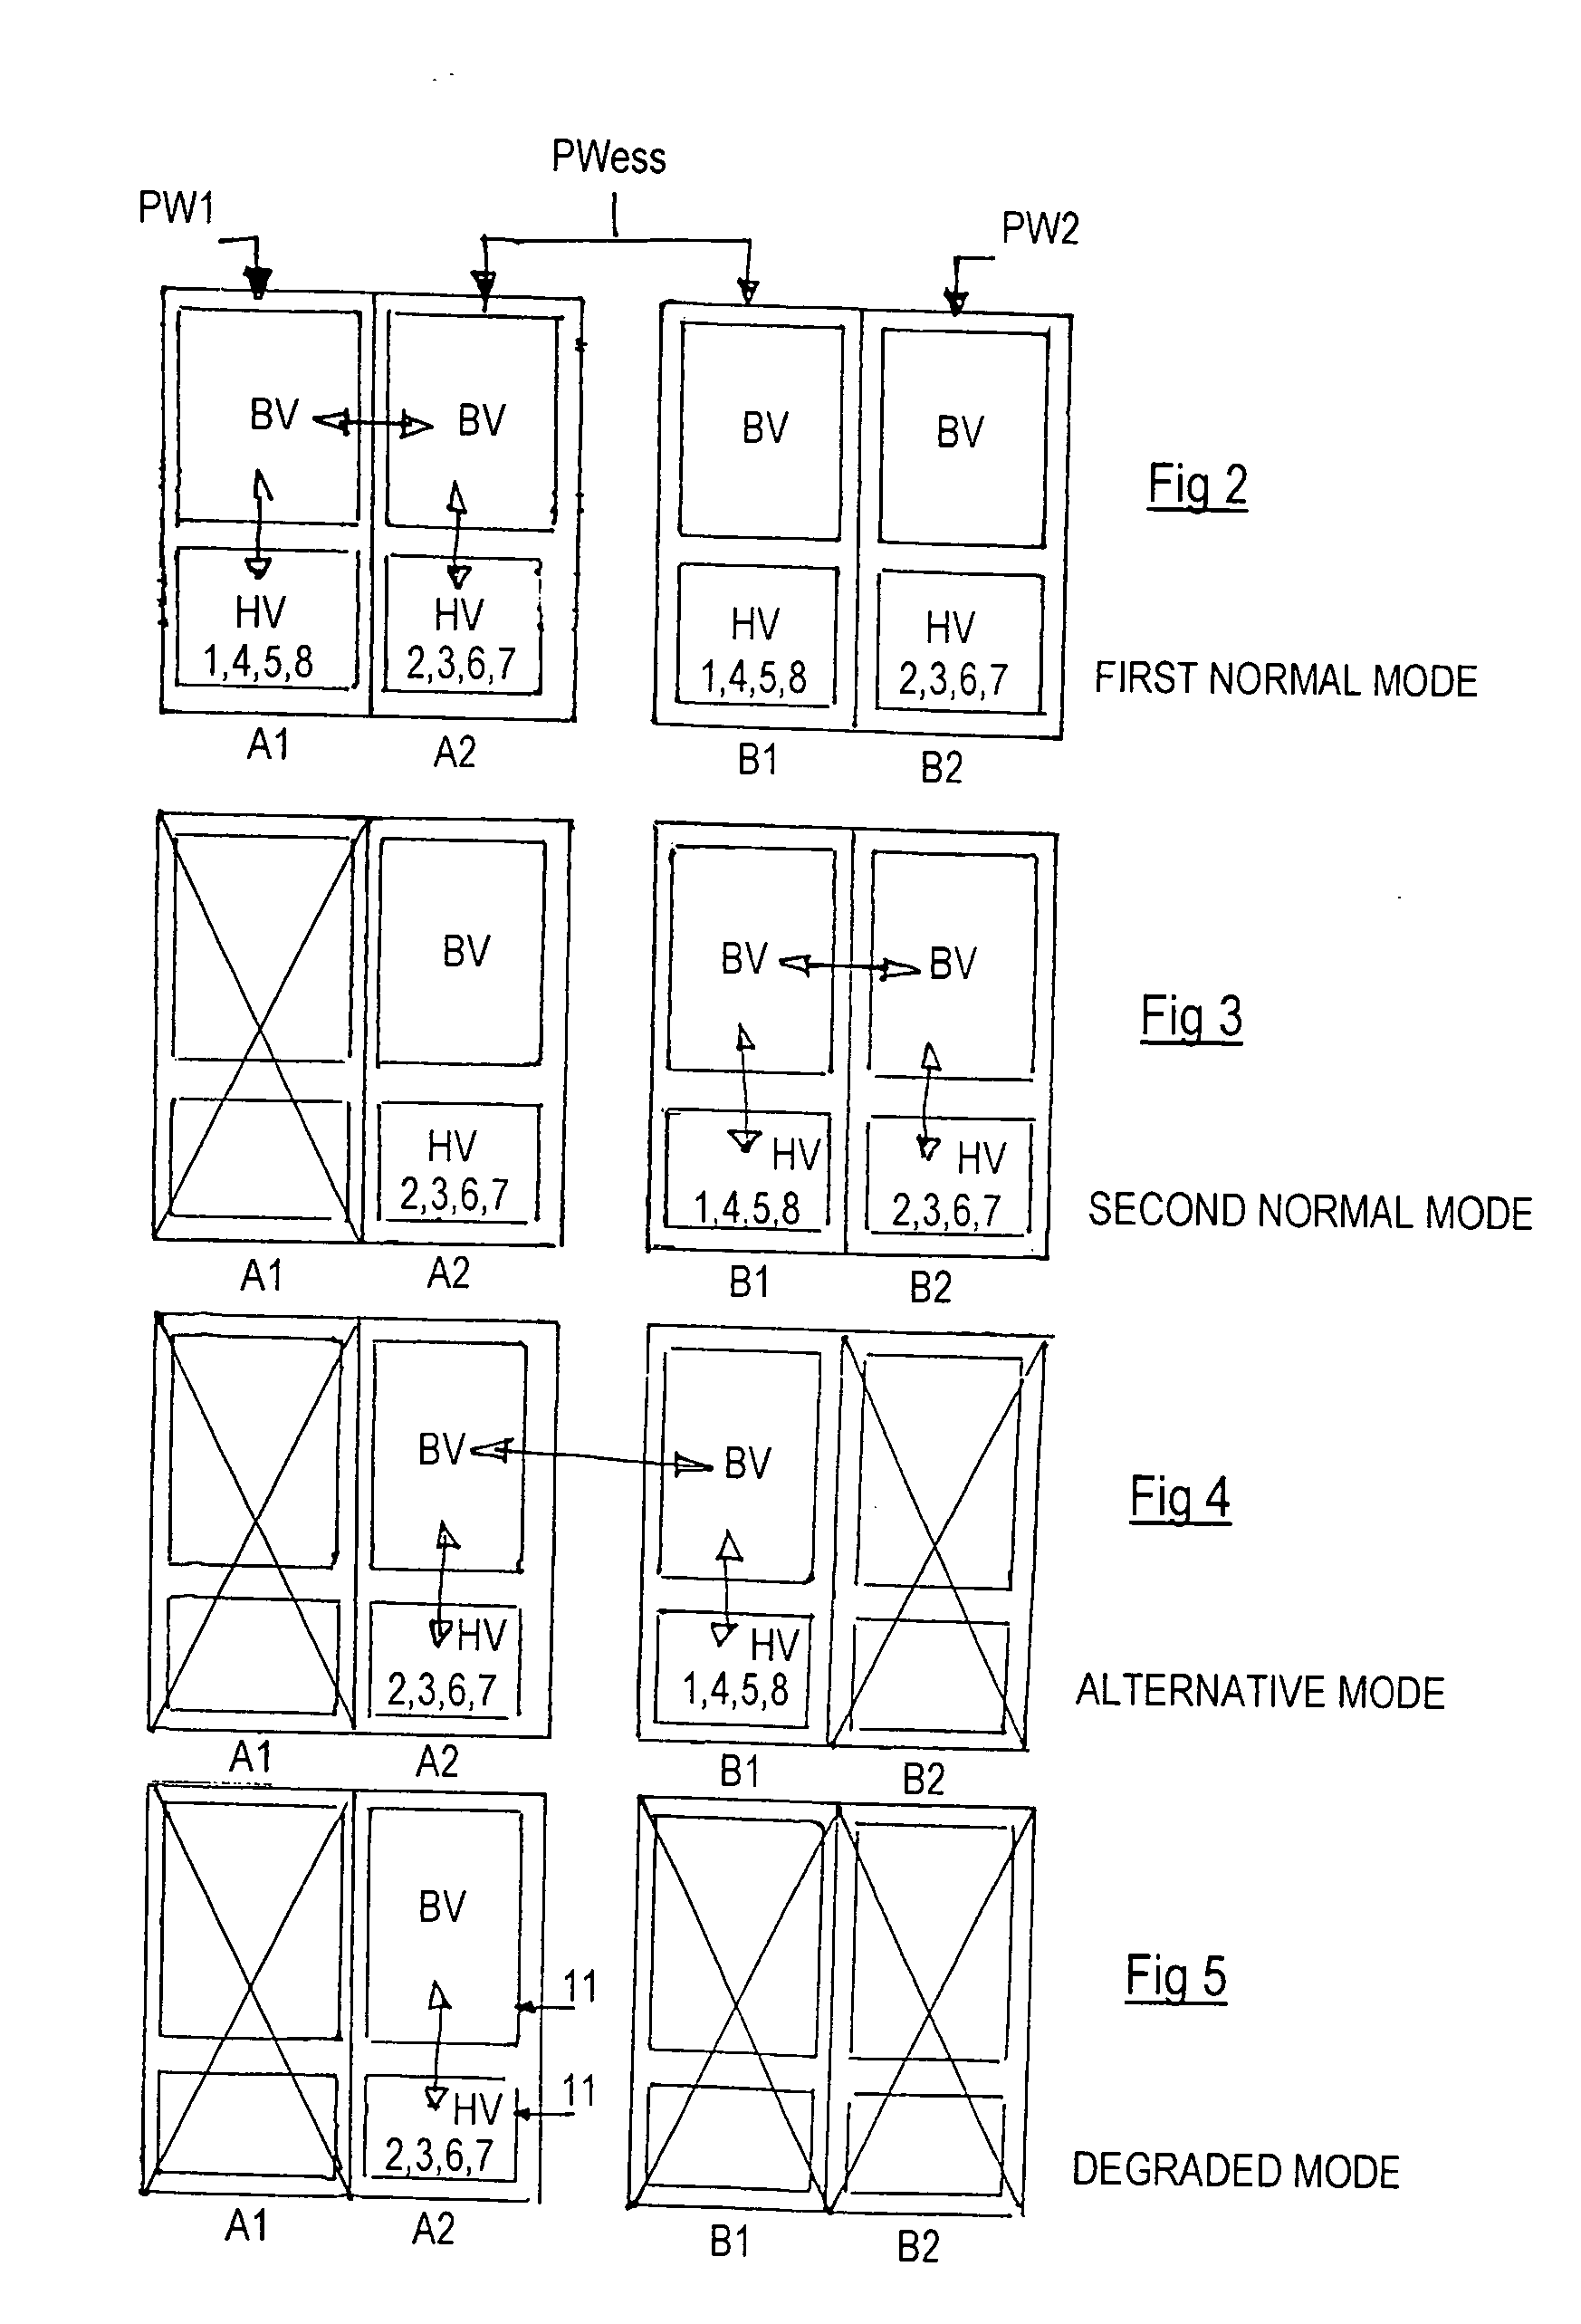 Architecture for an airplane braking system including two computers and capable of withstanding two breakdowns, and a method of managing such an architecture